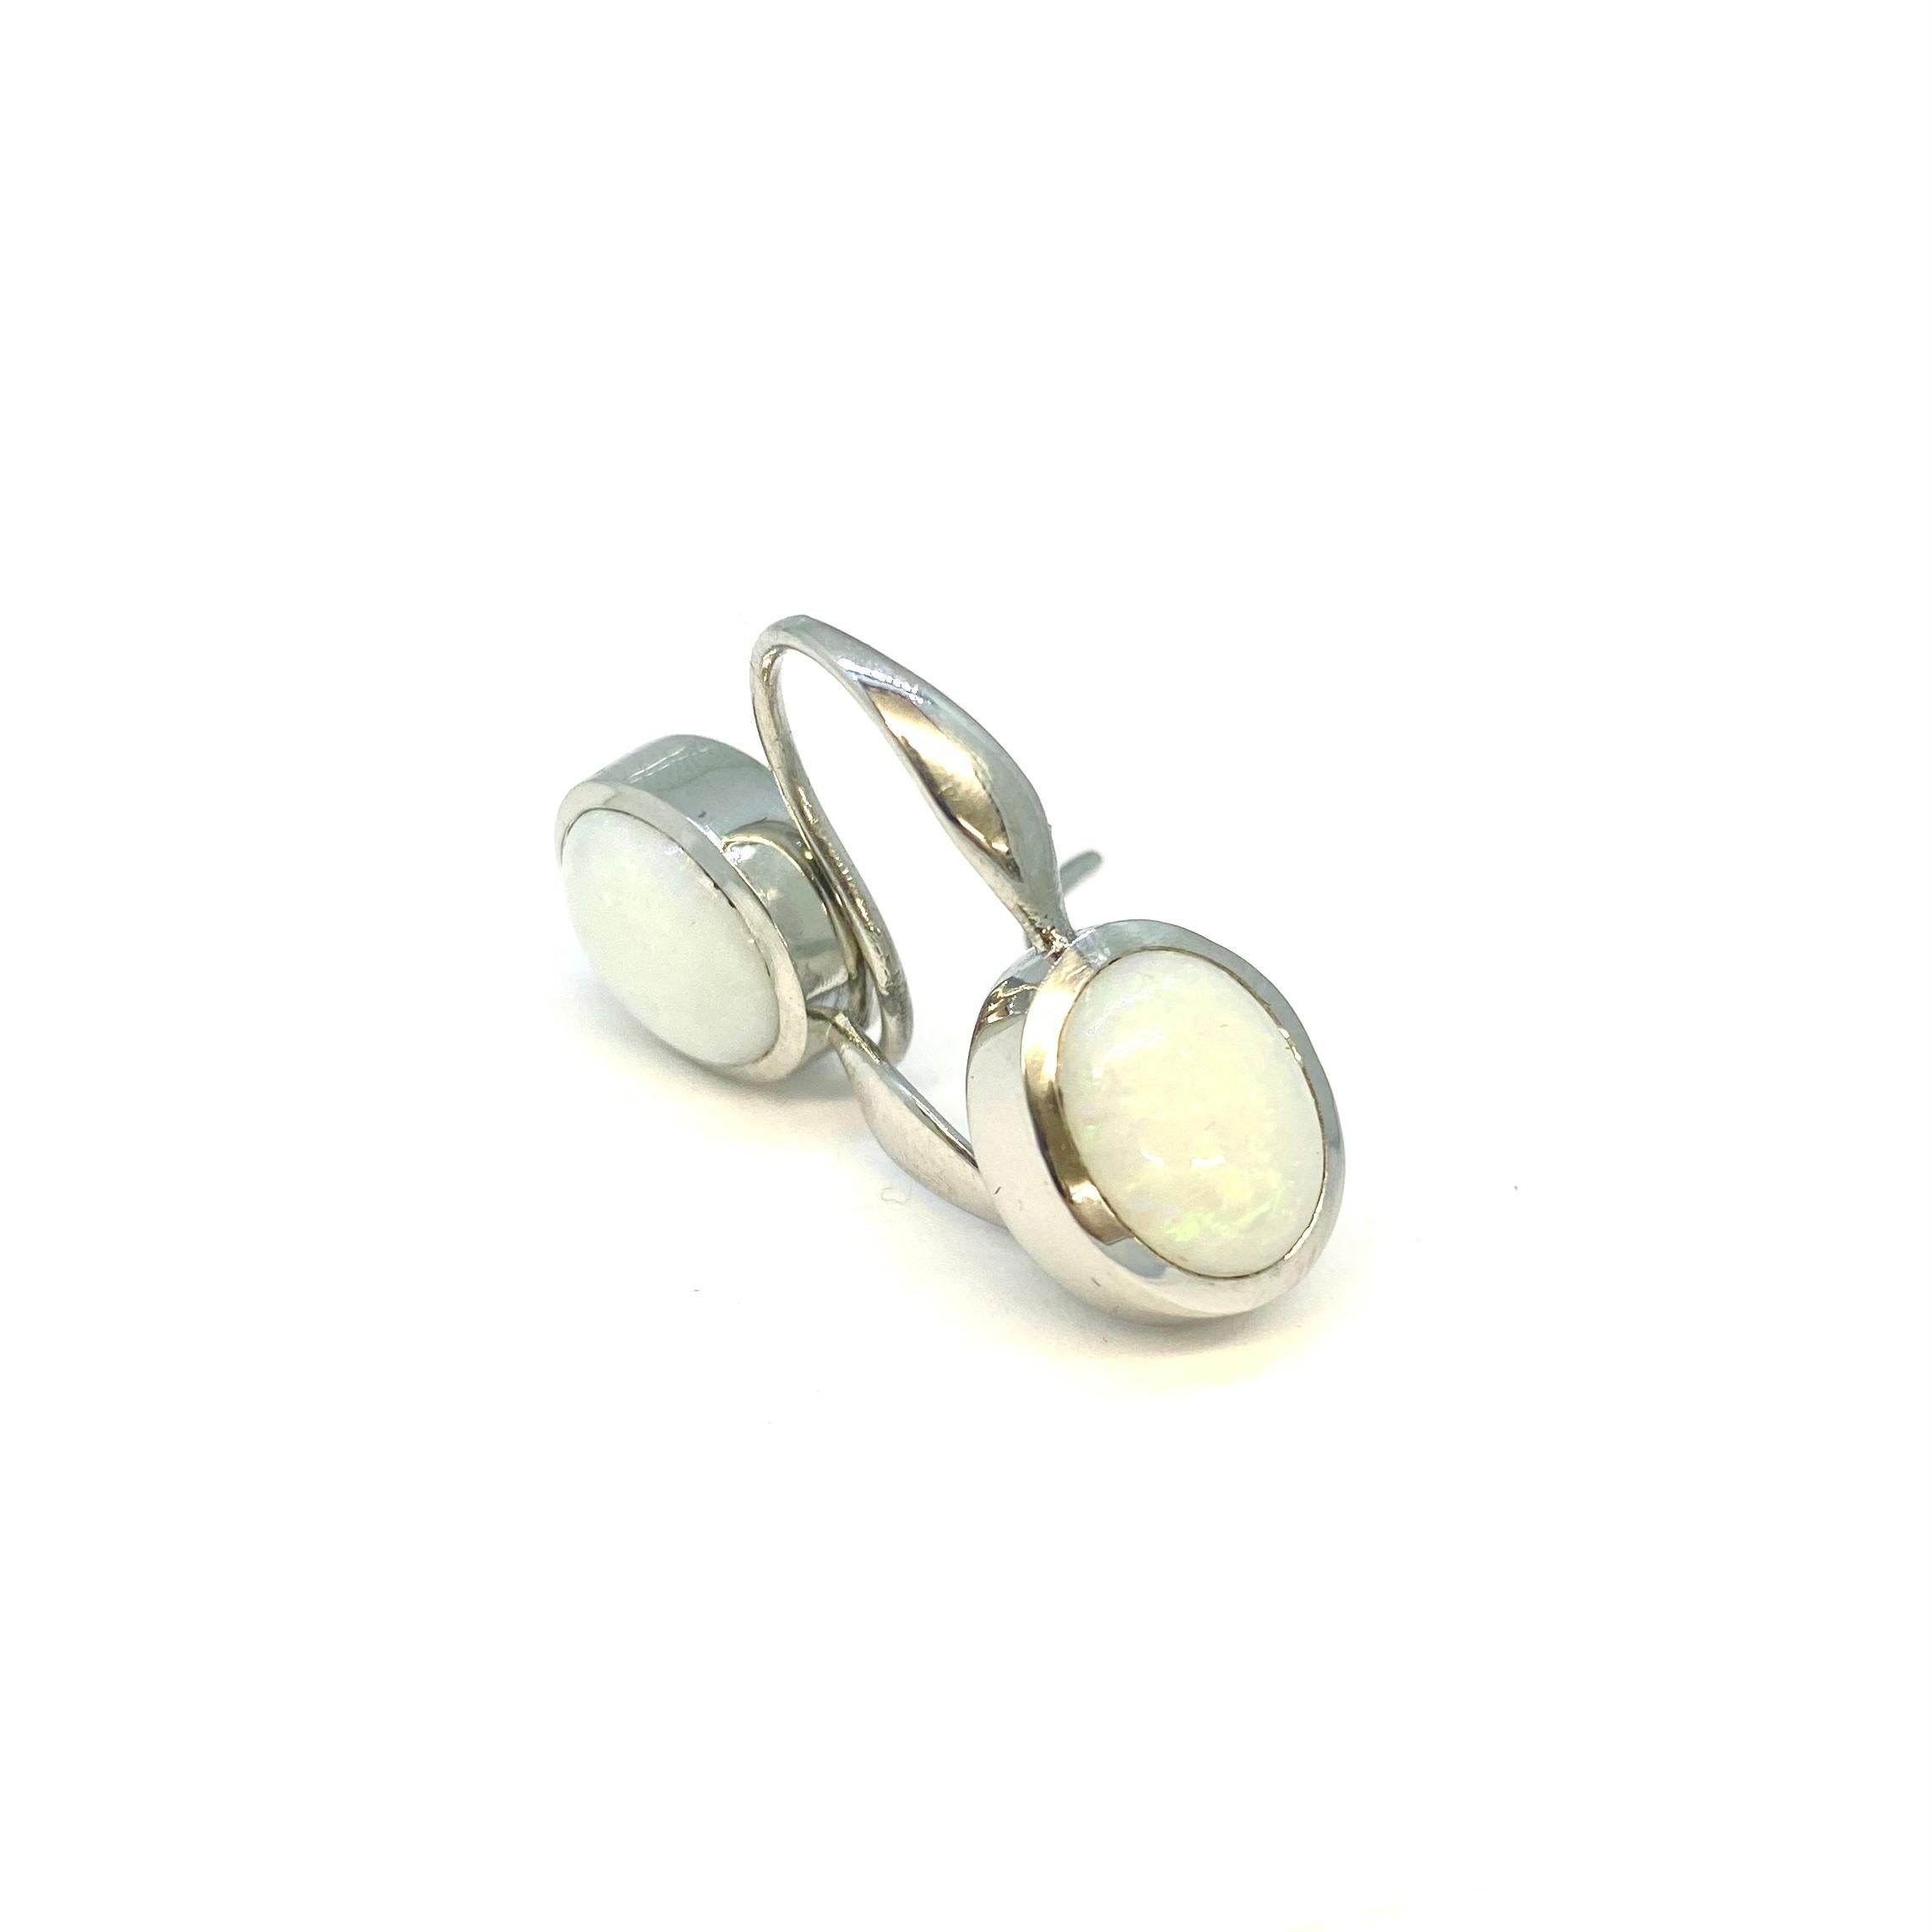 Earrings made from polished platinum 950 with 2 white australian opals, cabochon cut, 5.10ct.

Lesunja is a brand that is known for its luxurious jewellery collection. Their earring collection is no exception, with a range of classic shapes,